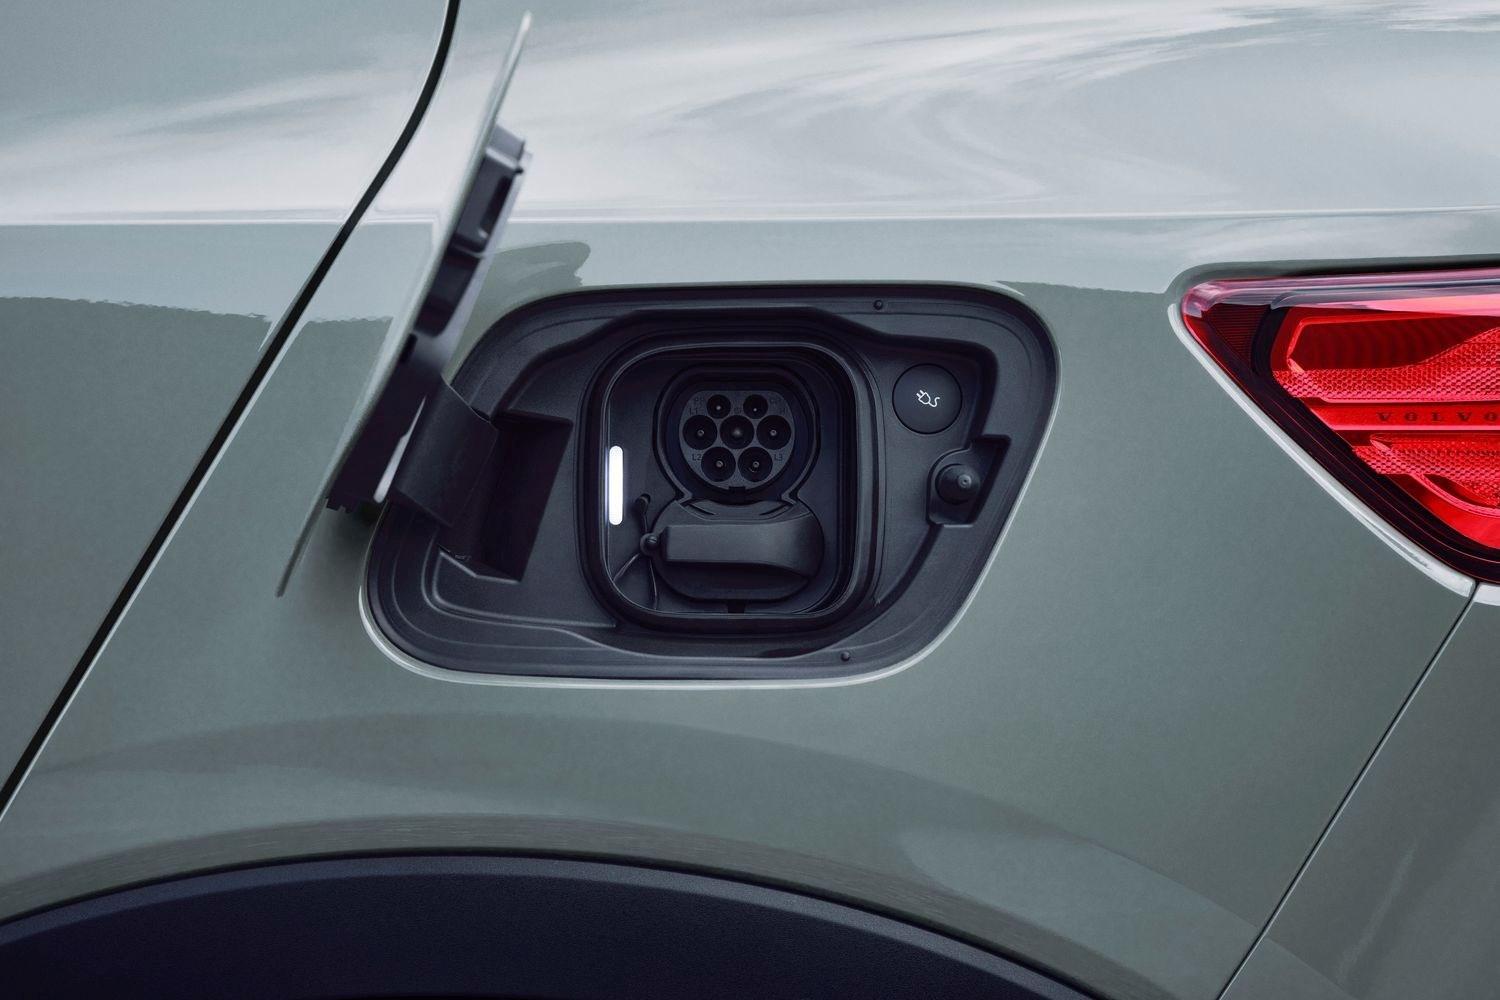 New Volvo XC40 Recharge image of charging port